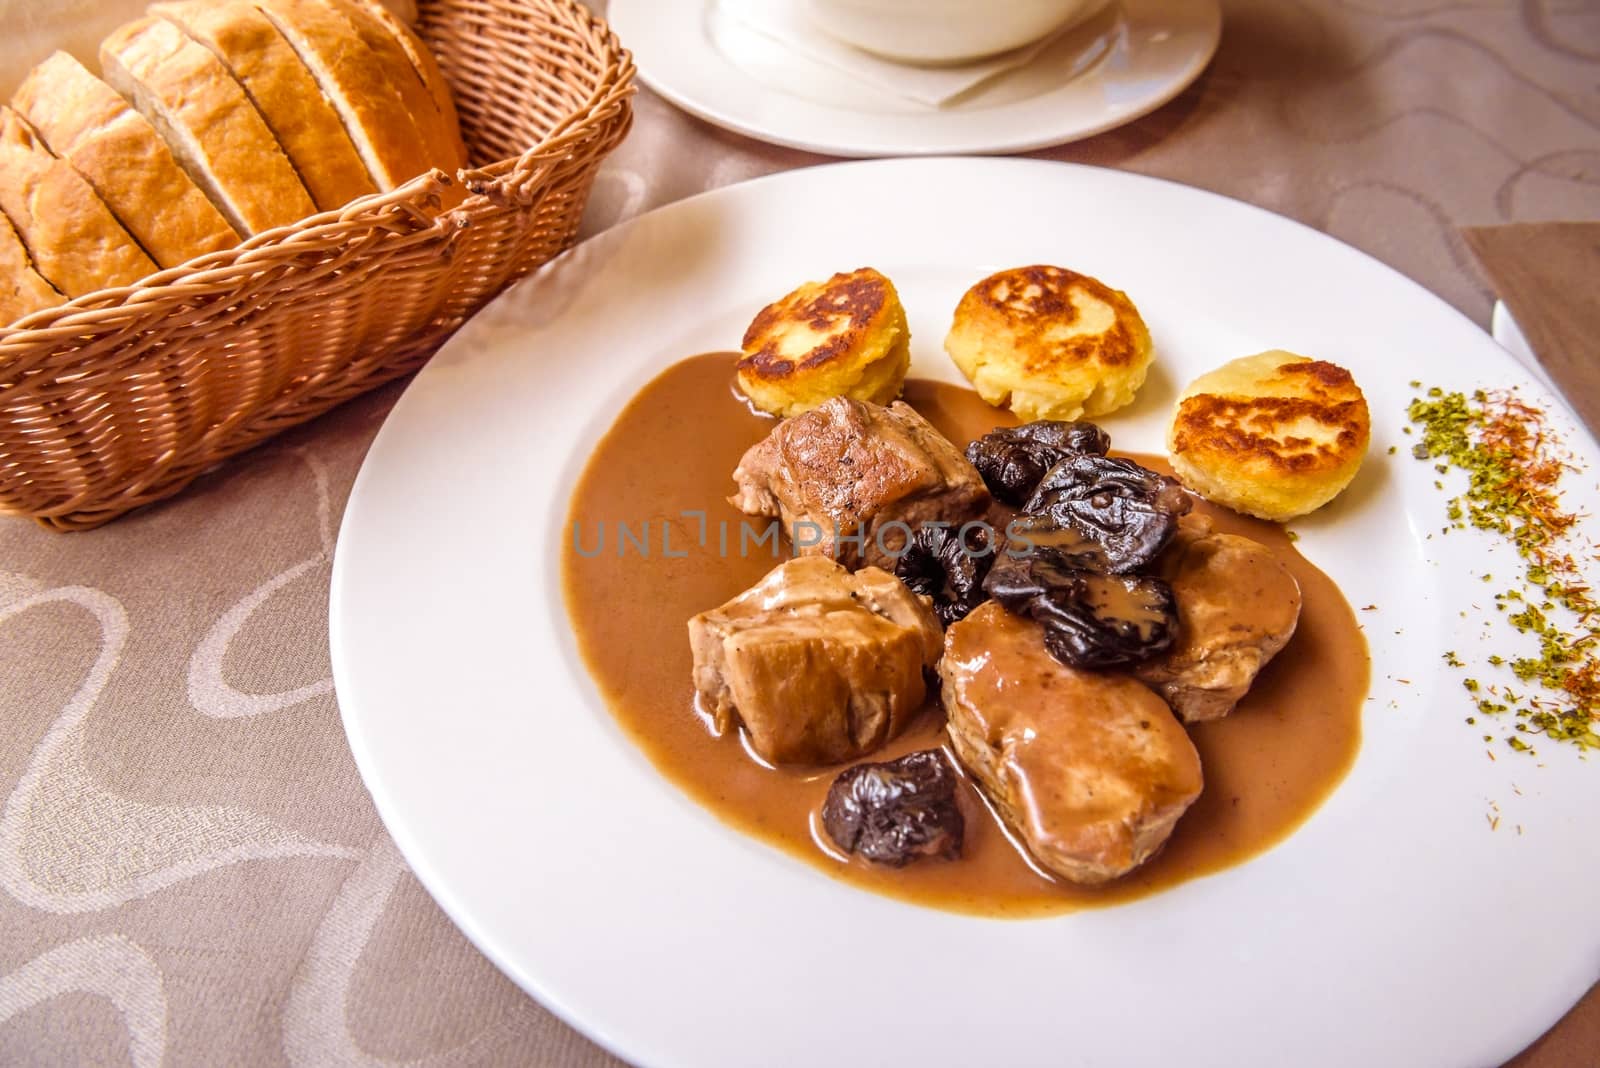 Pork medallions and dried plums by YesPhotographers